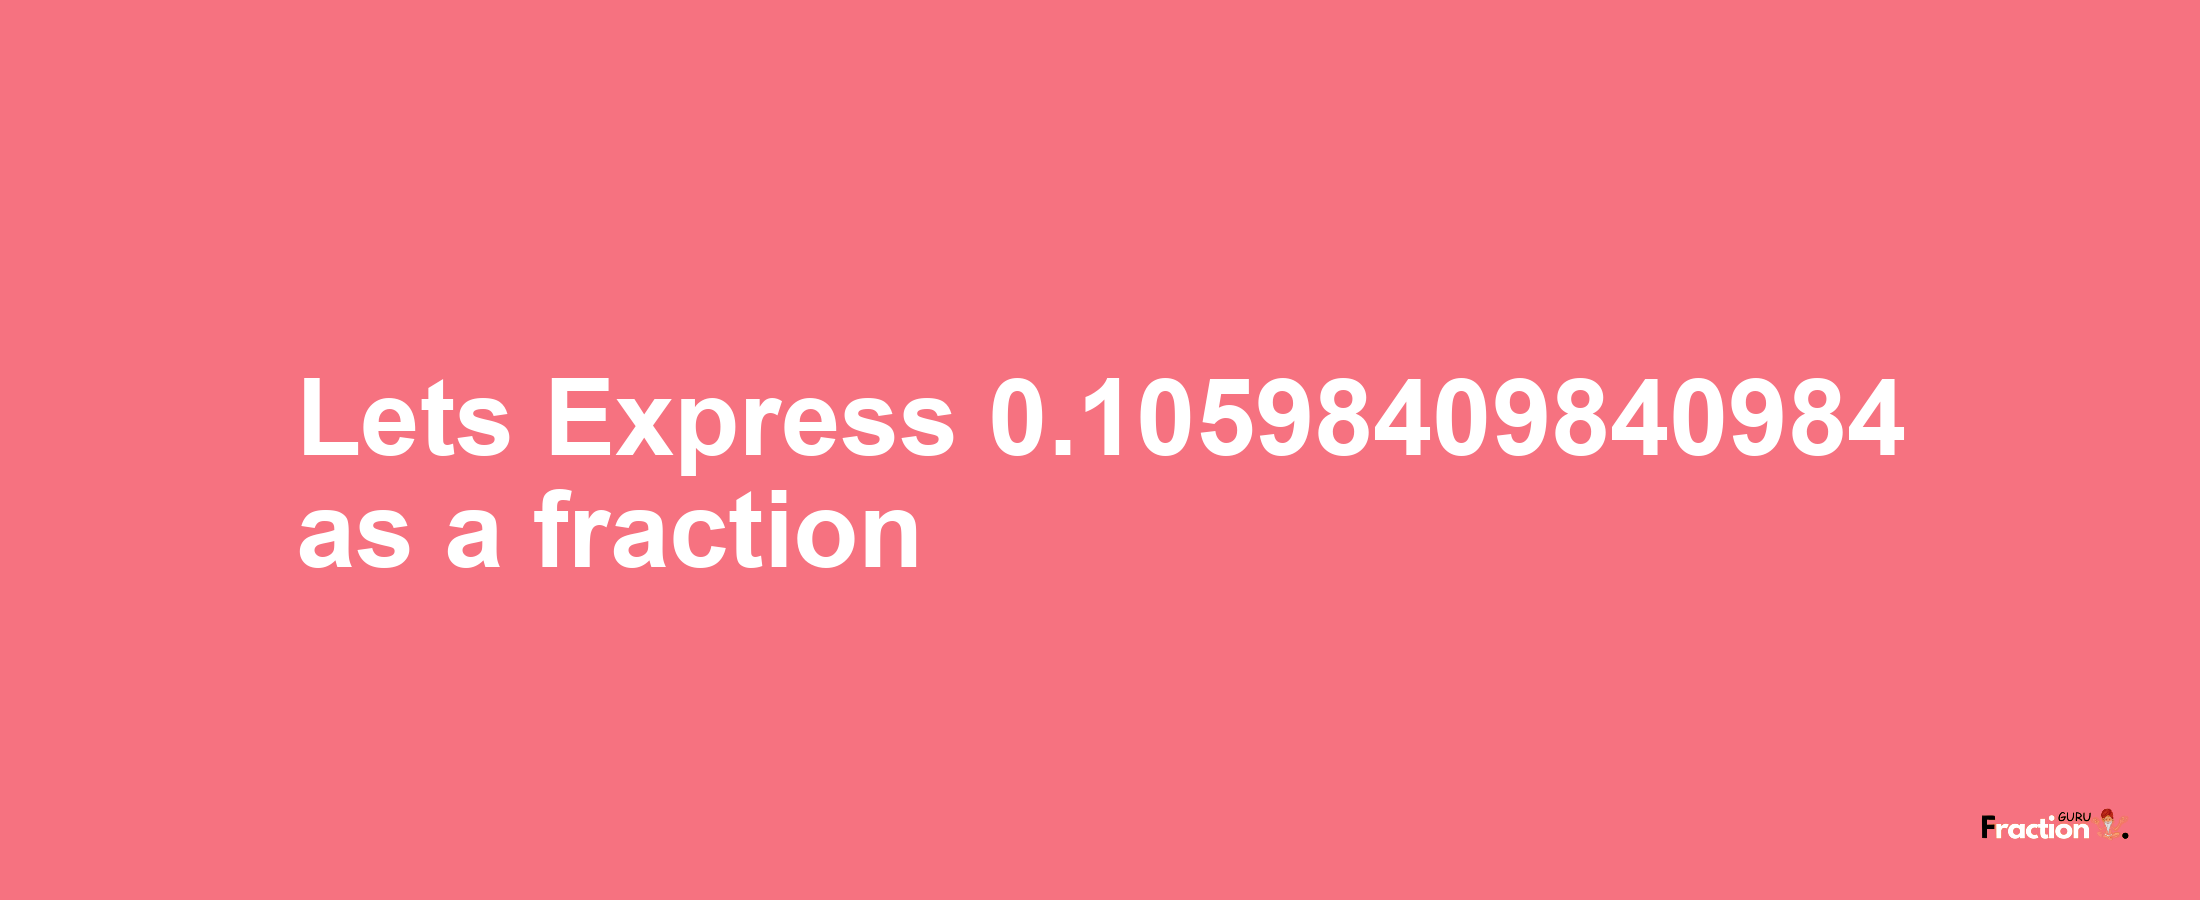 Lets Express 0.10598409840984 as afraction